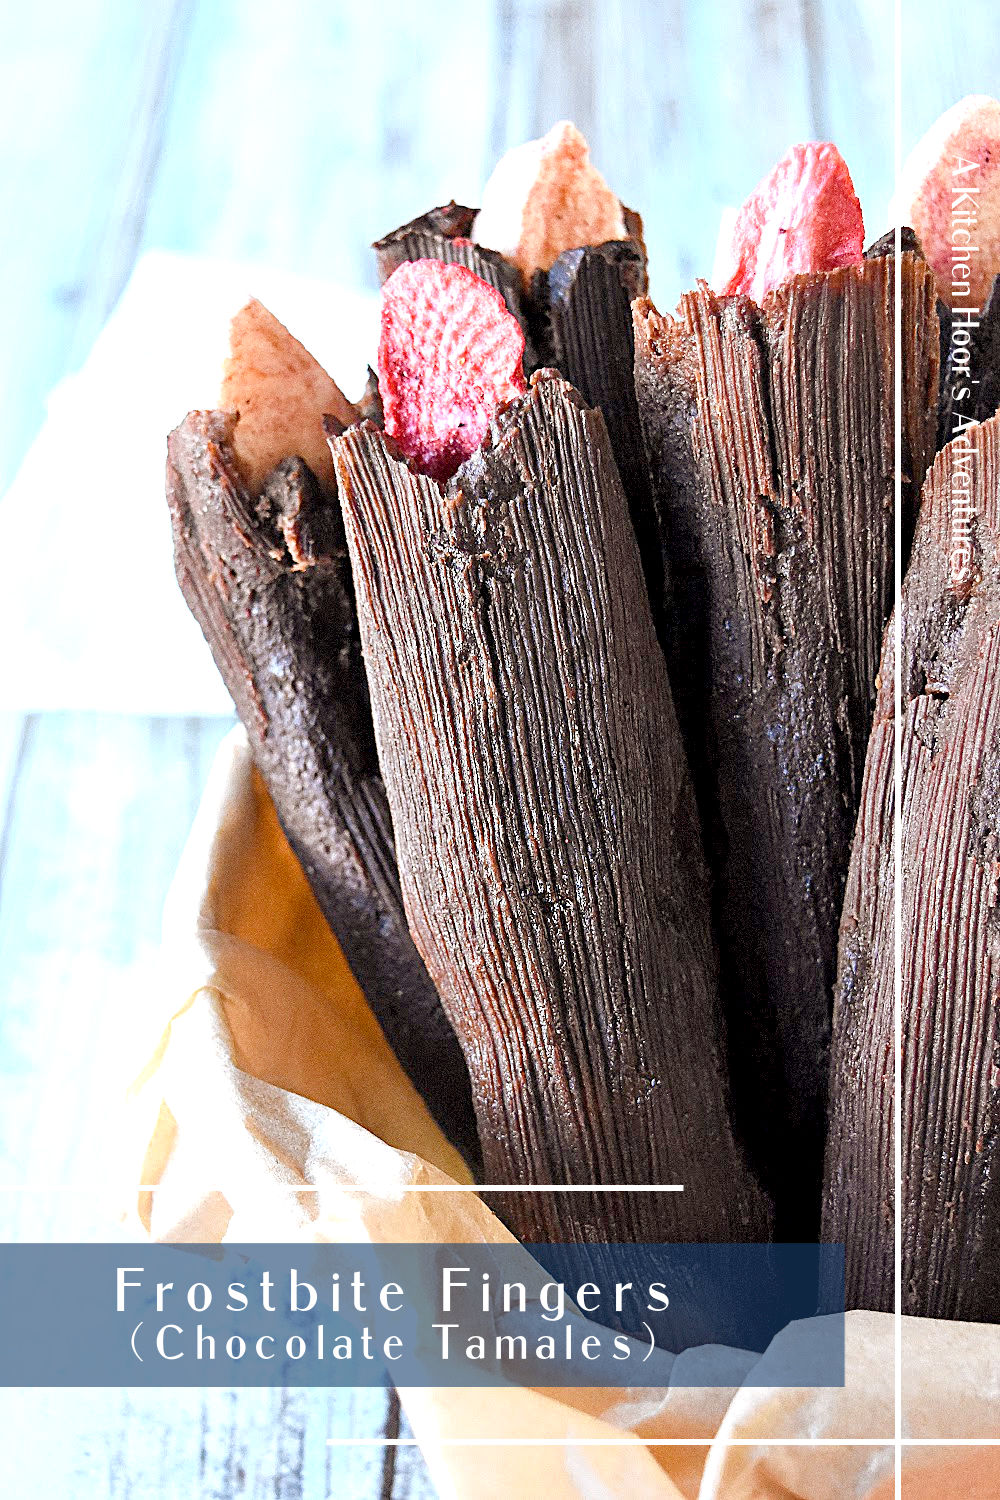 Frostbite Fingers (Chocolate Tamales) will leave everyone dying for more!